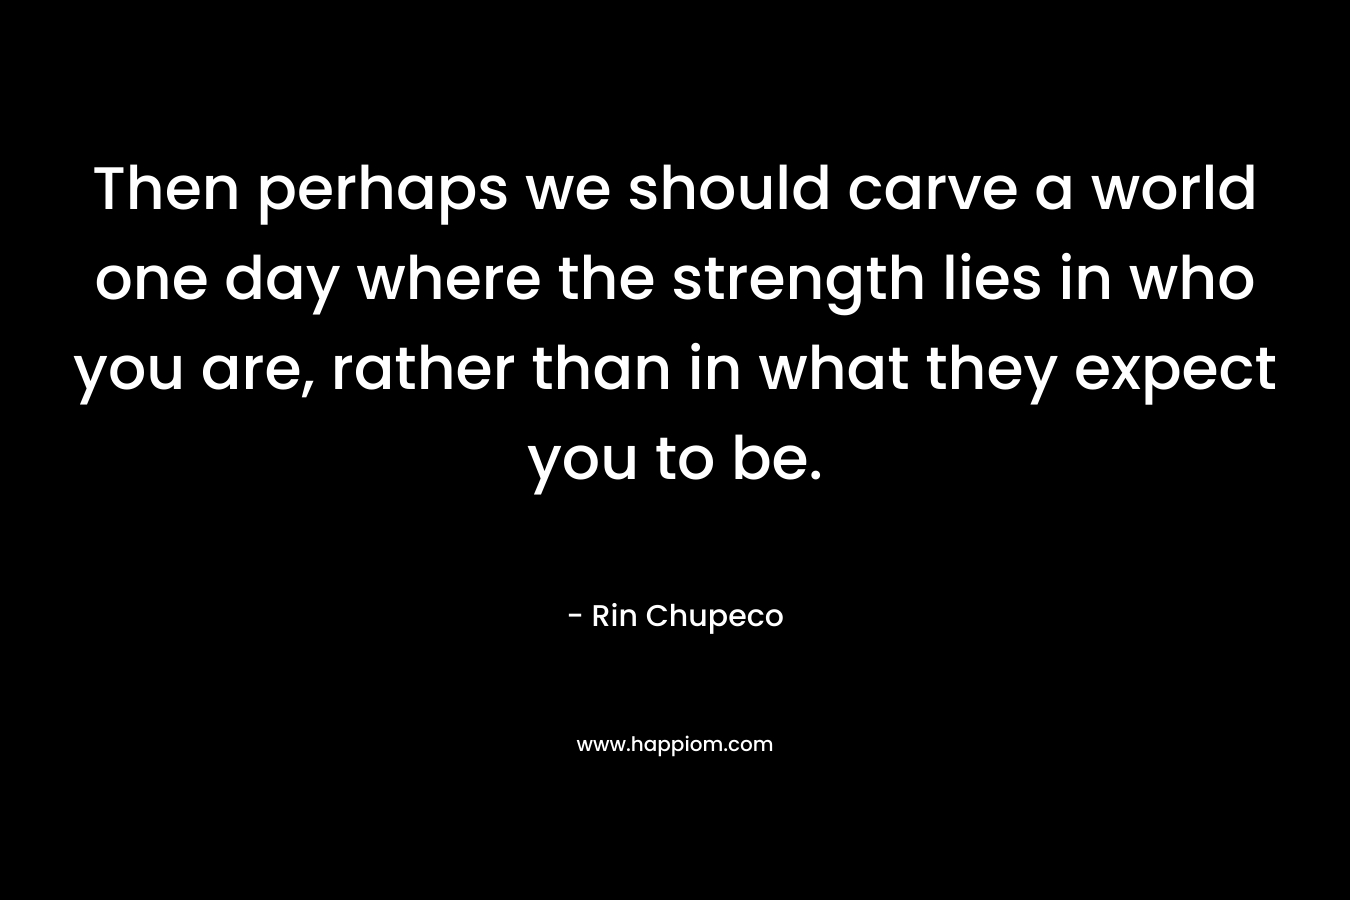 Then perhaps we should carve a world one day where the strength lies in who you are, rather than in what they expect you to be. – Rin Chupeco